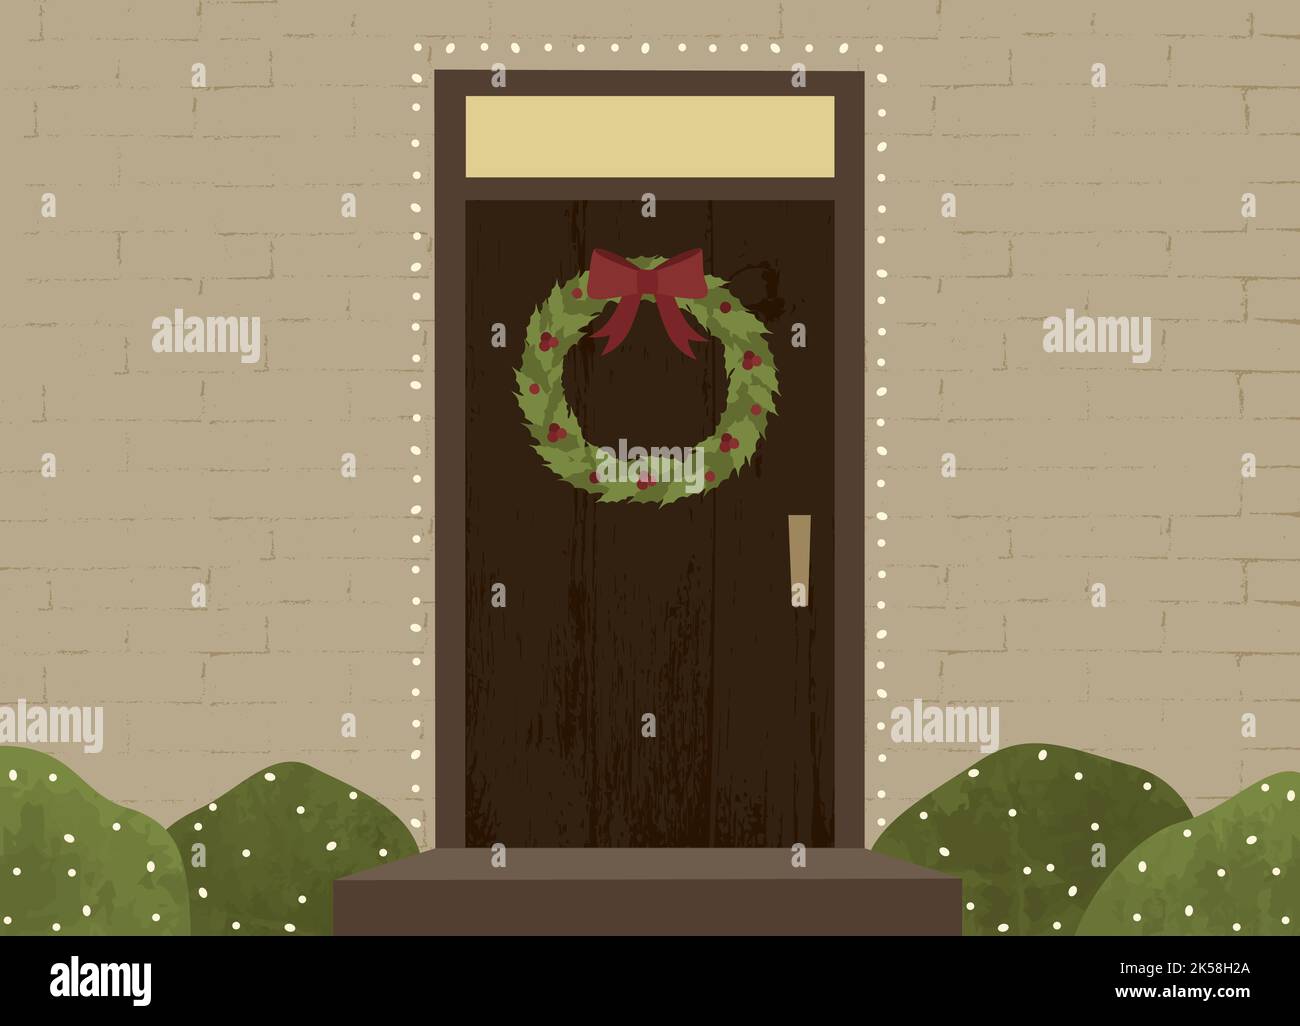 A warm toned holiday door with wreath, in a cut paper style with textures Stock Vector